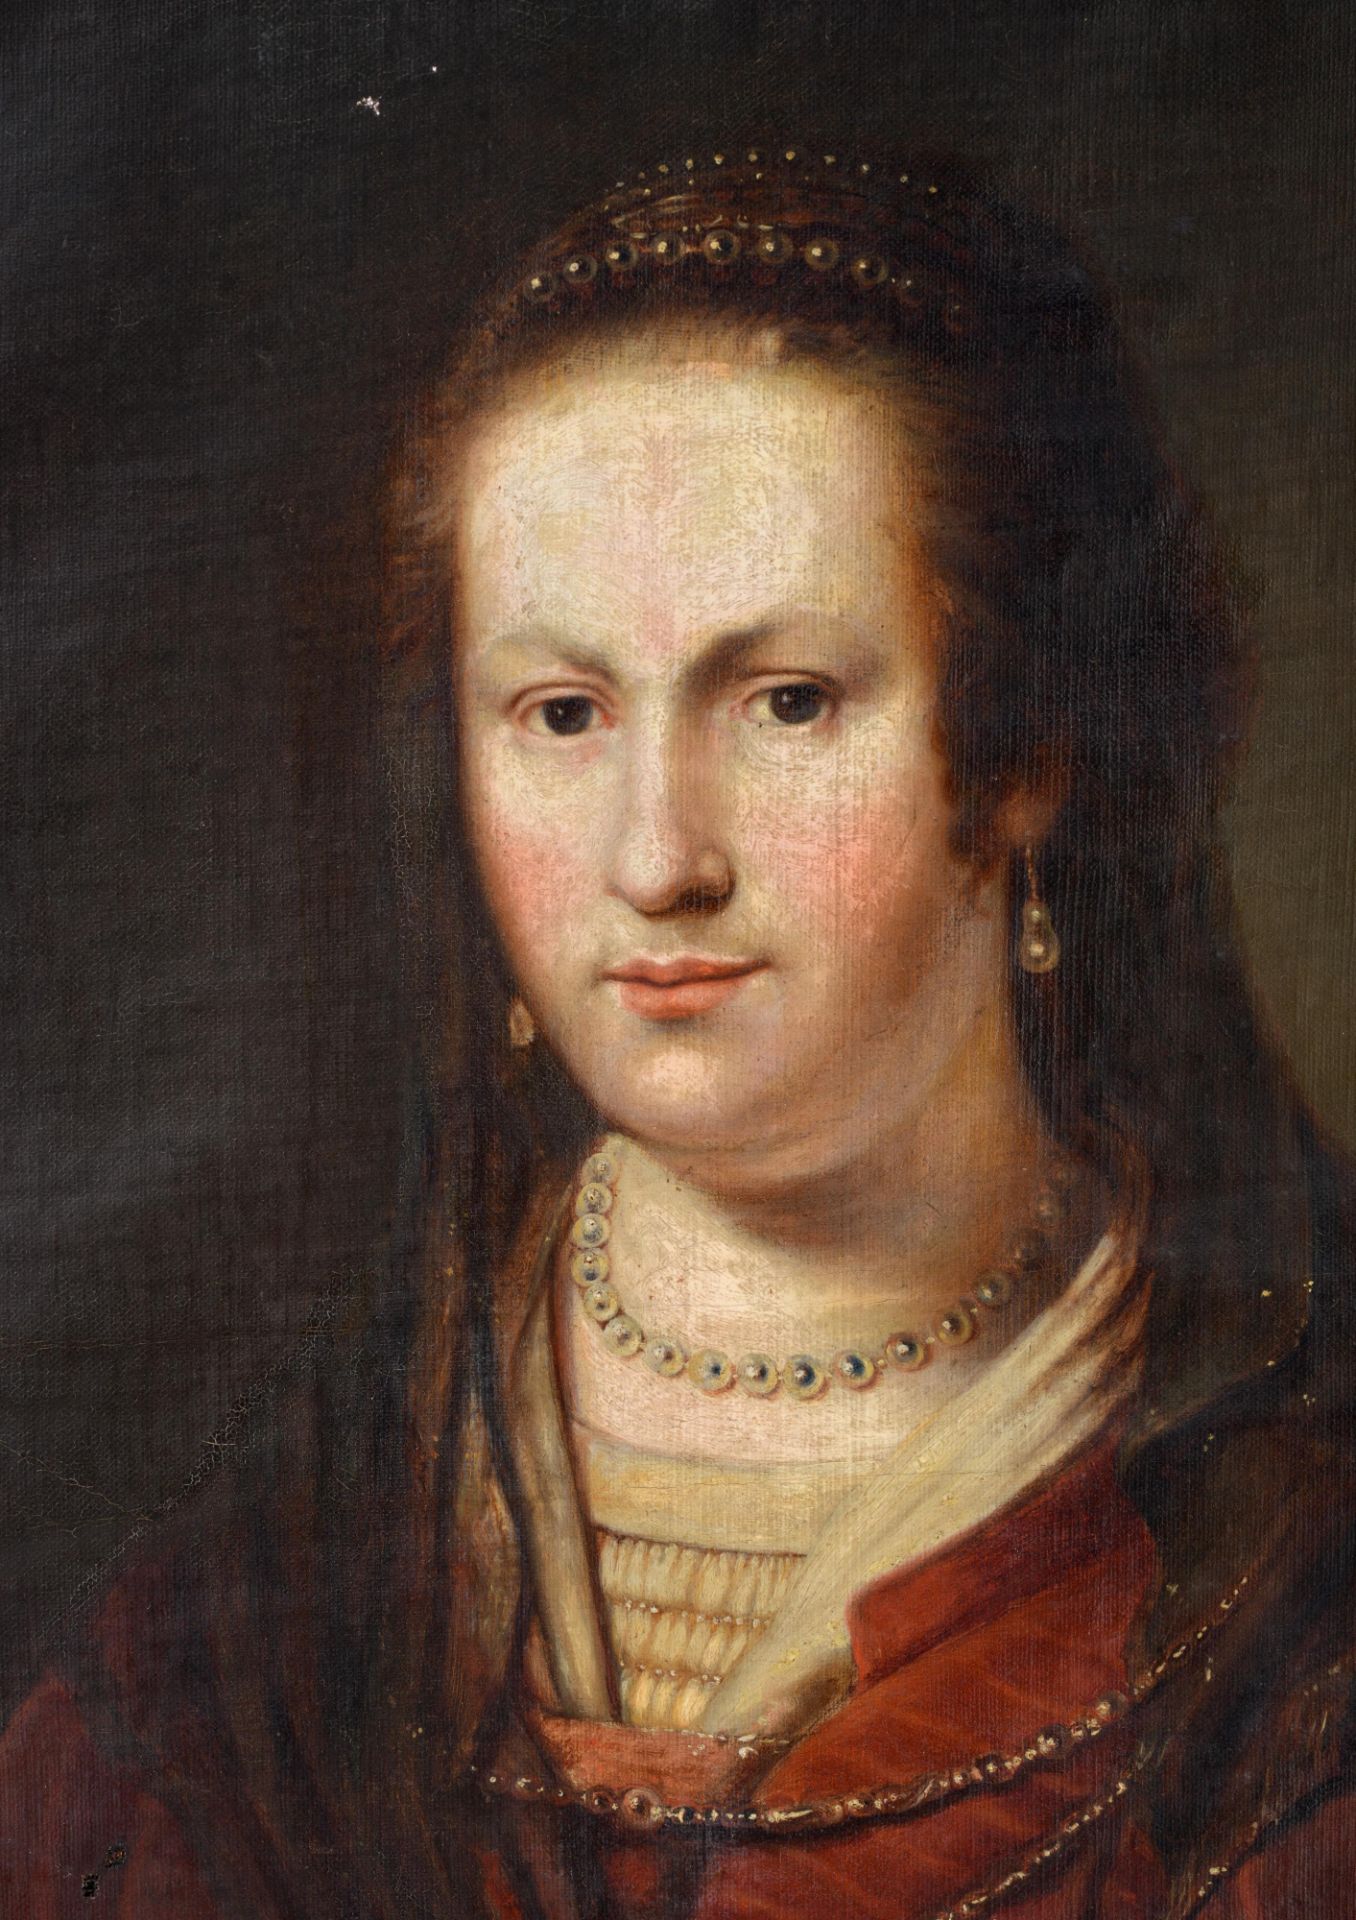 No visible signature, the portrait of a noble lady with a pearl necklace, 17th/18thC, oil on canvas, - Image 10 of 11